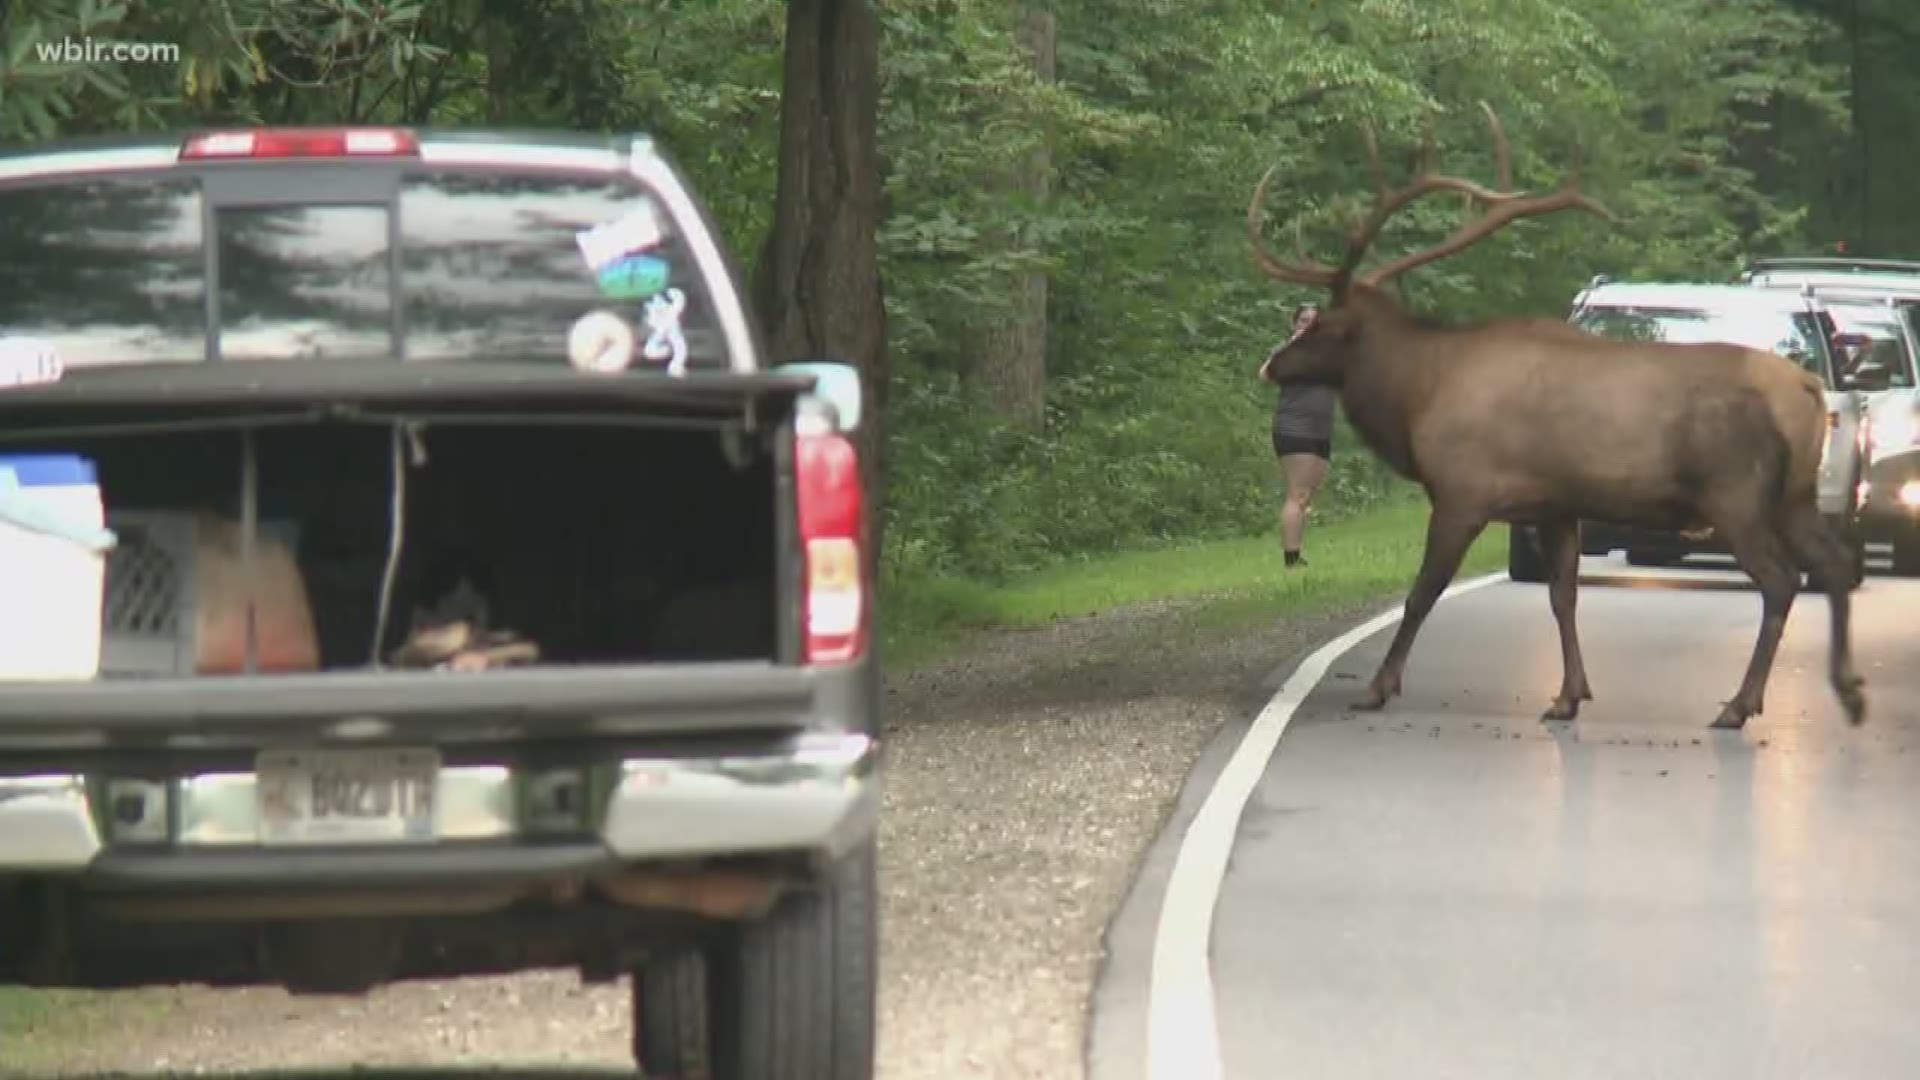 Park rangers in the Smokies are warning visitors  about particularly aggressive elk behavior after a woman posted video on Facebook showing elk crowded around a tree that forced a man to climb for safety.